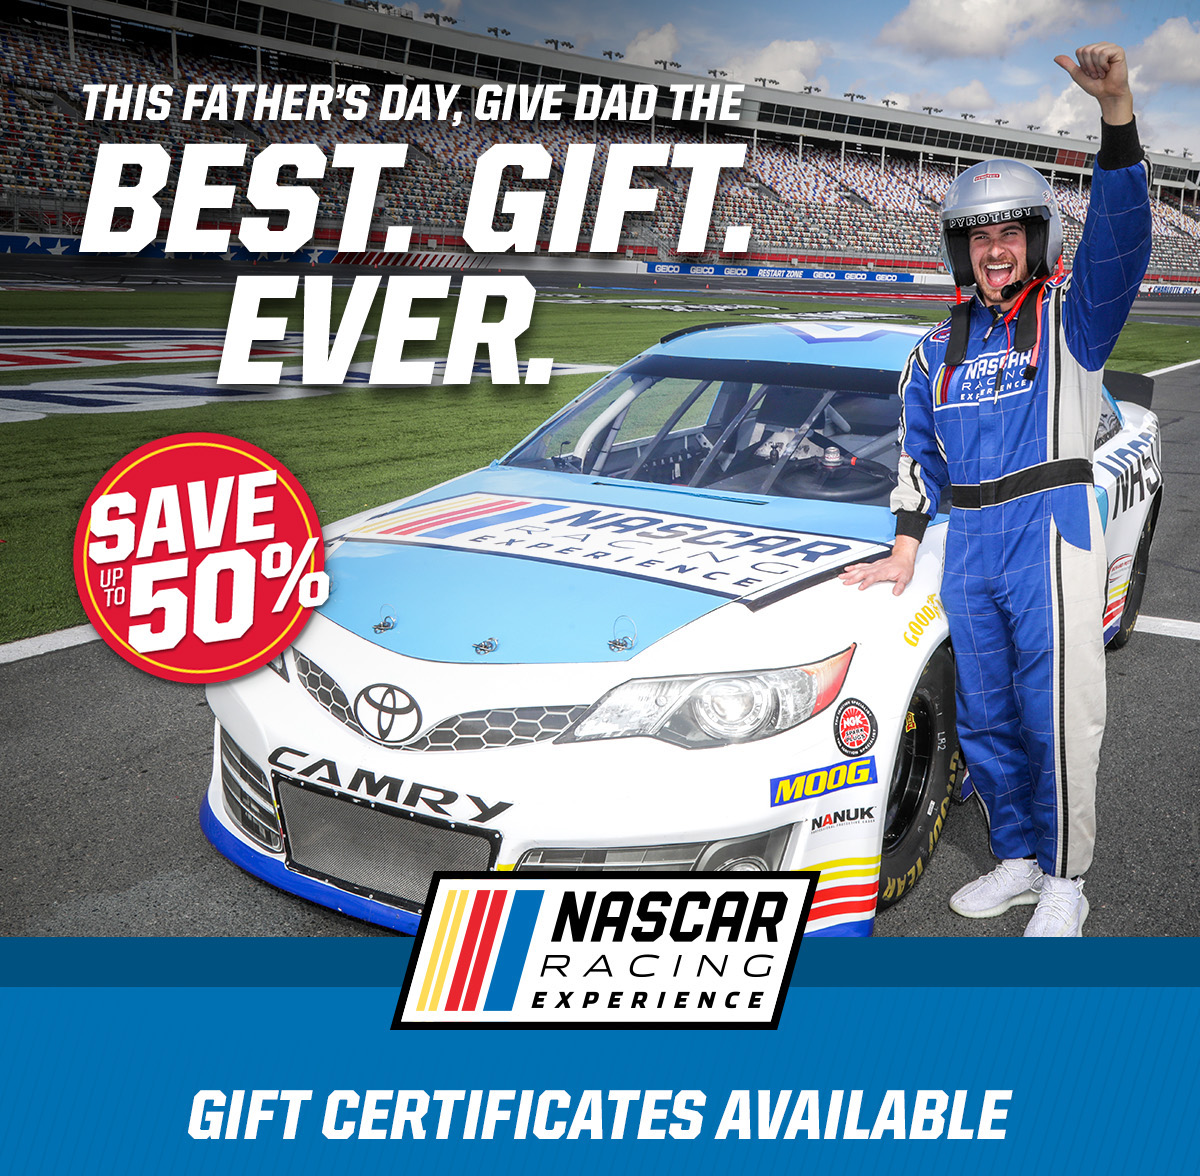 Dover international Speedway Richard Petty Driving experience Gift